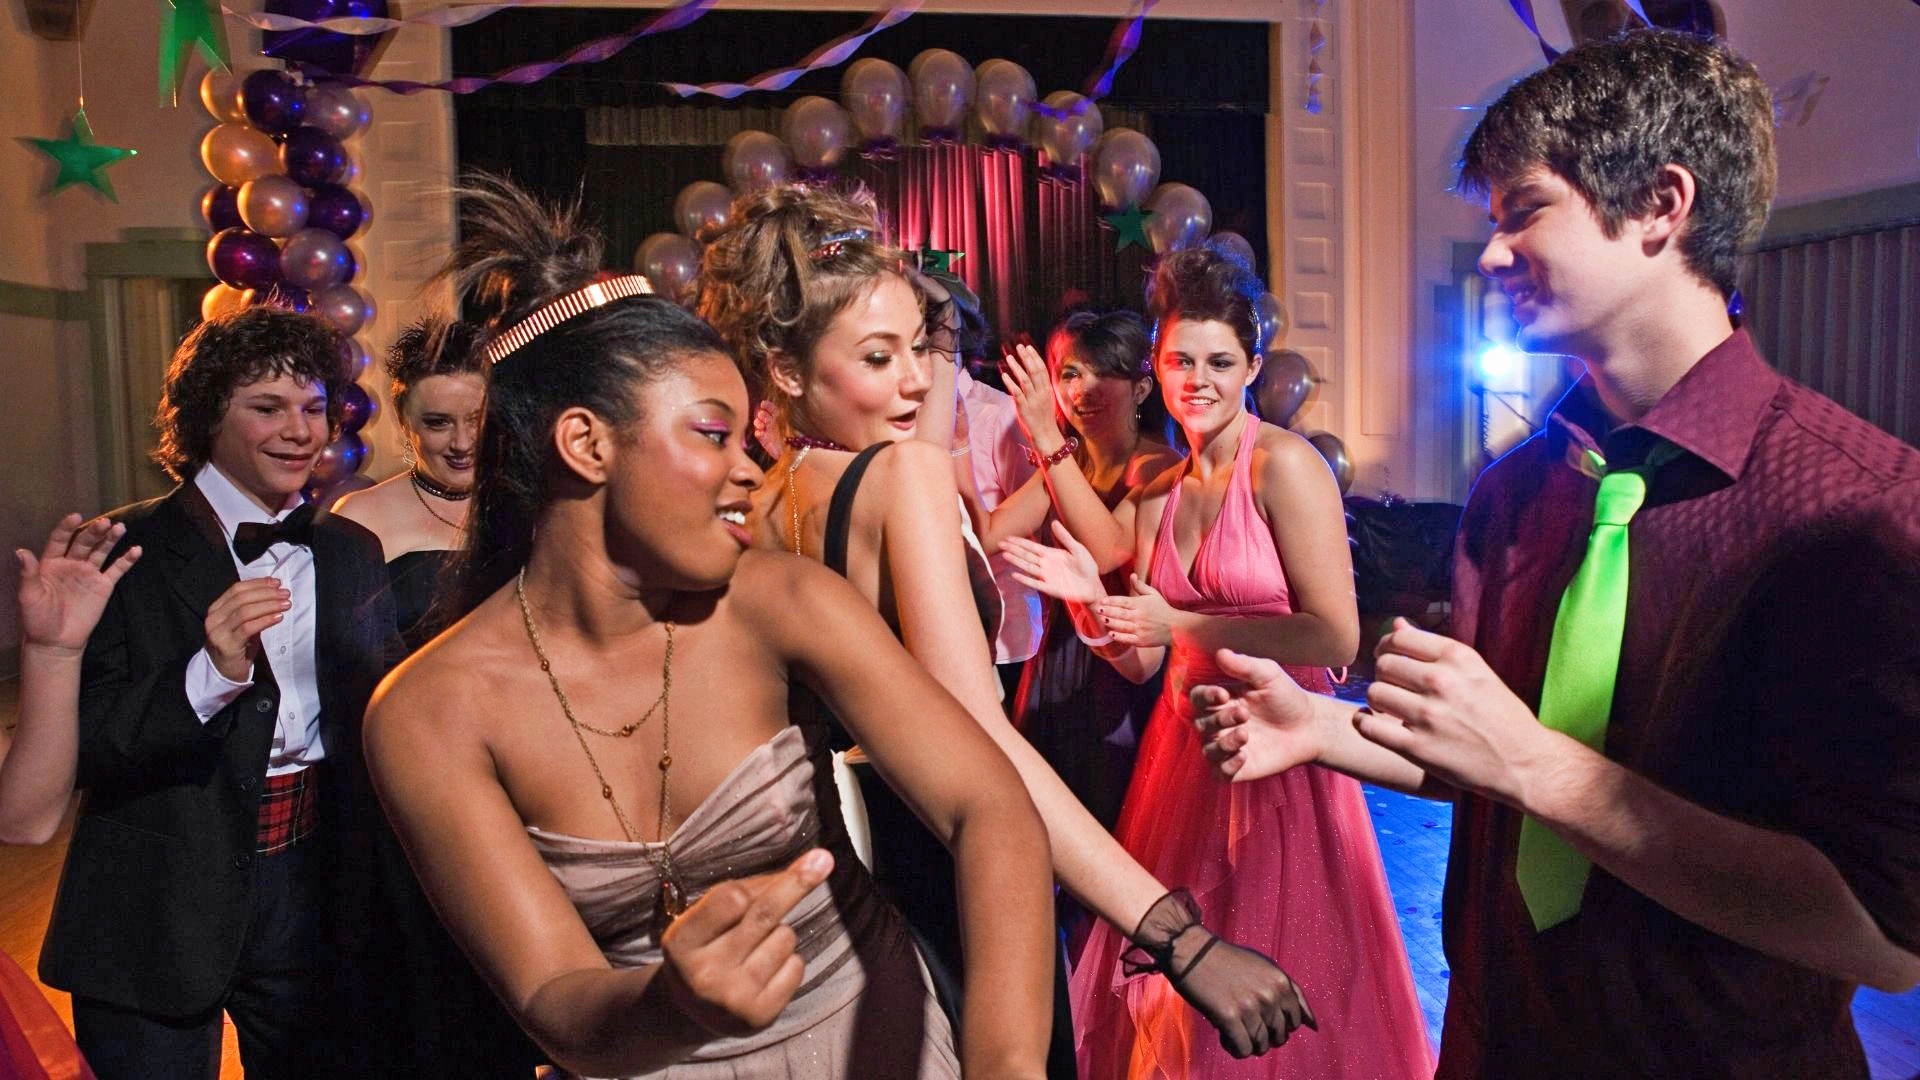 Picture of younger patients at prom type party dancing and enjoying themselves.